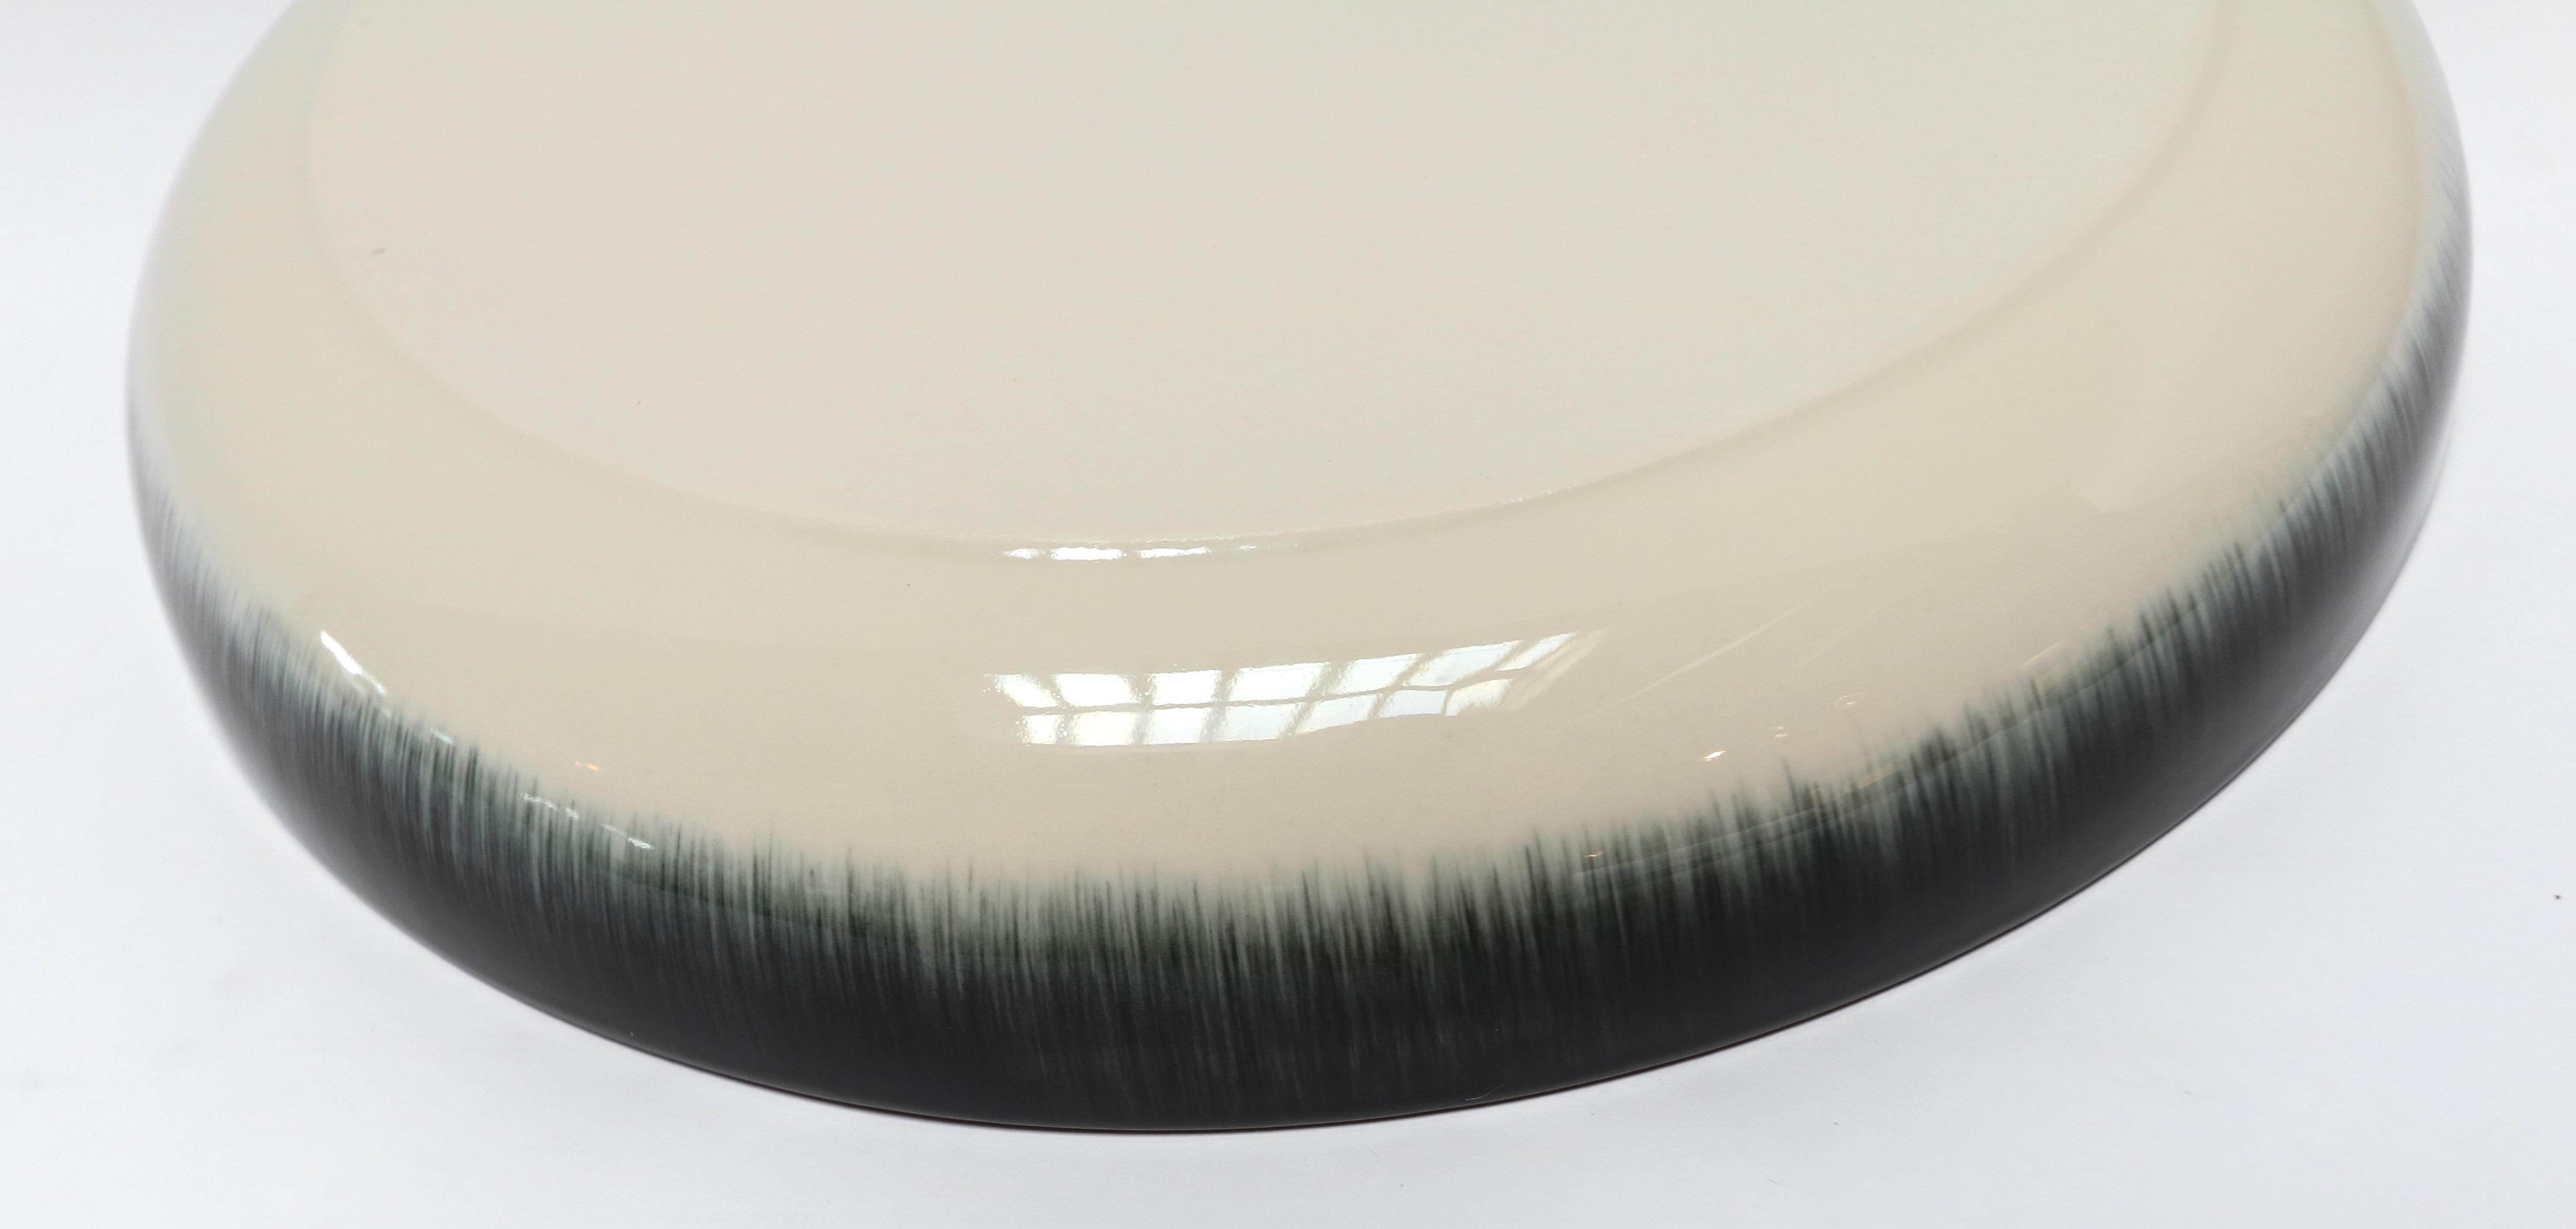 Contemporary Ann Demeulemeester for Serax Dé X-Large High Plate / Bowl in off White / Black